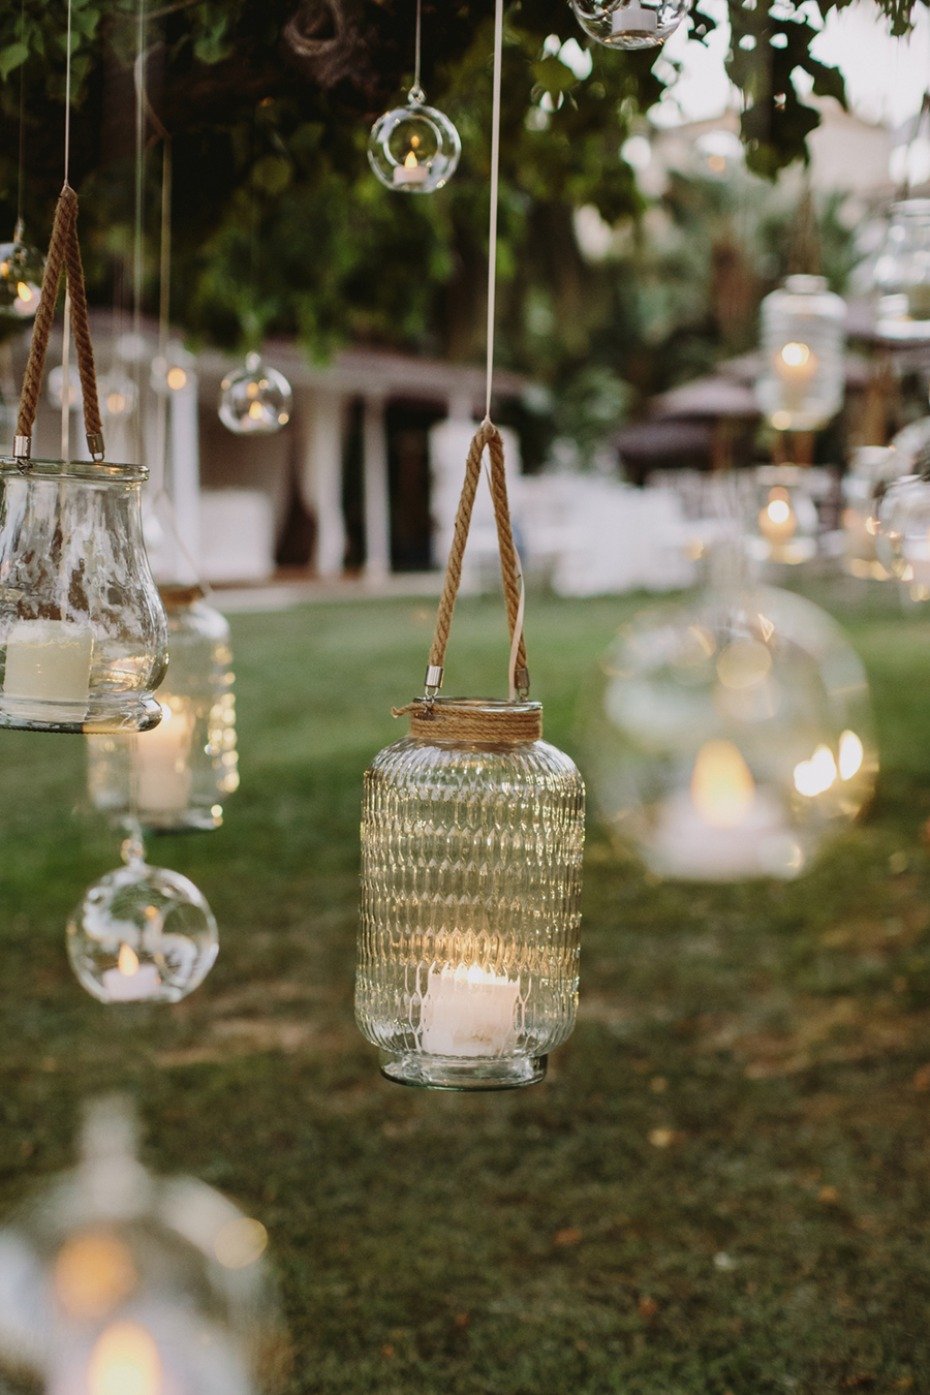 glowing and hanging lanterns in a tree